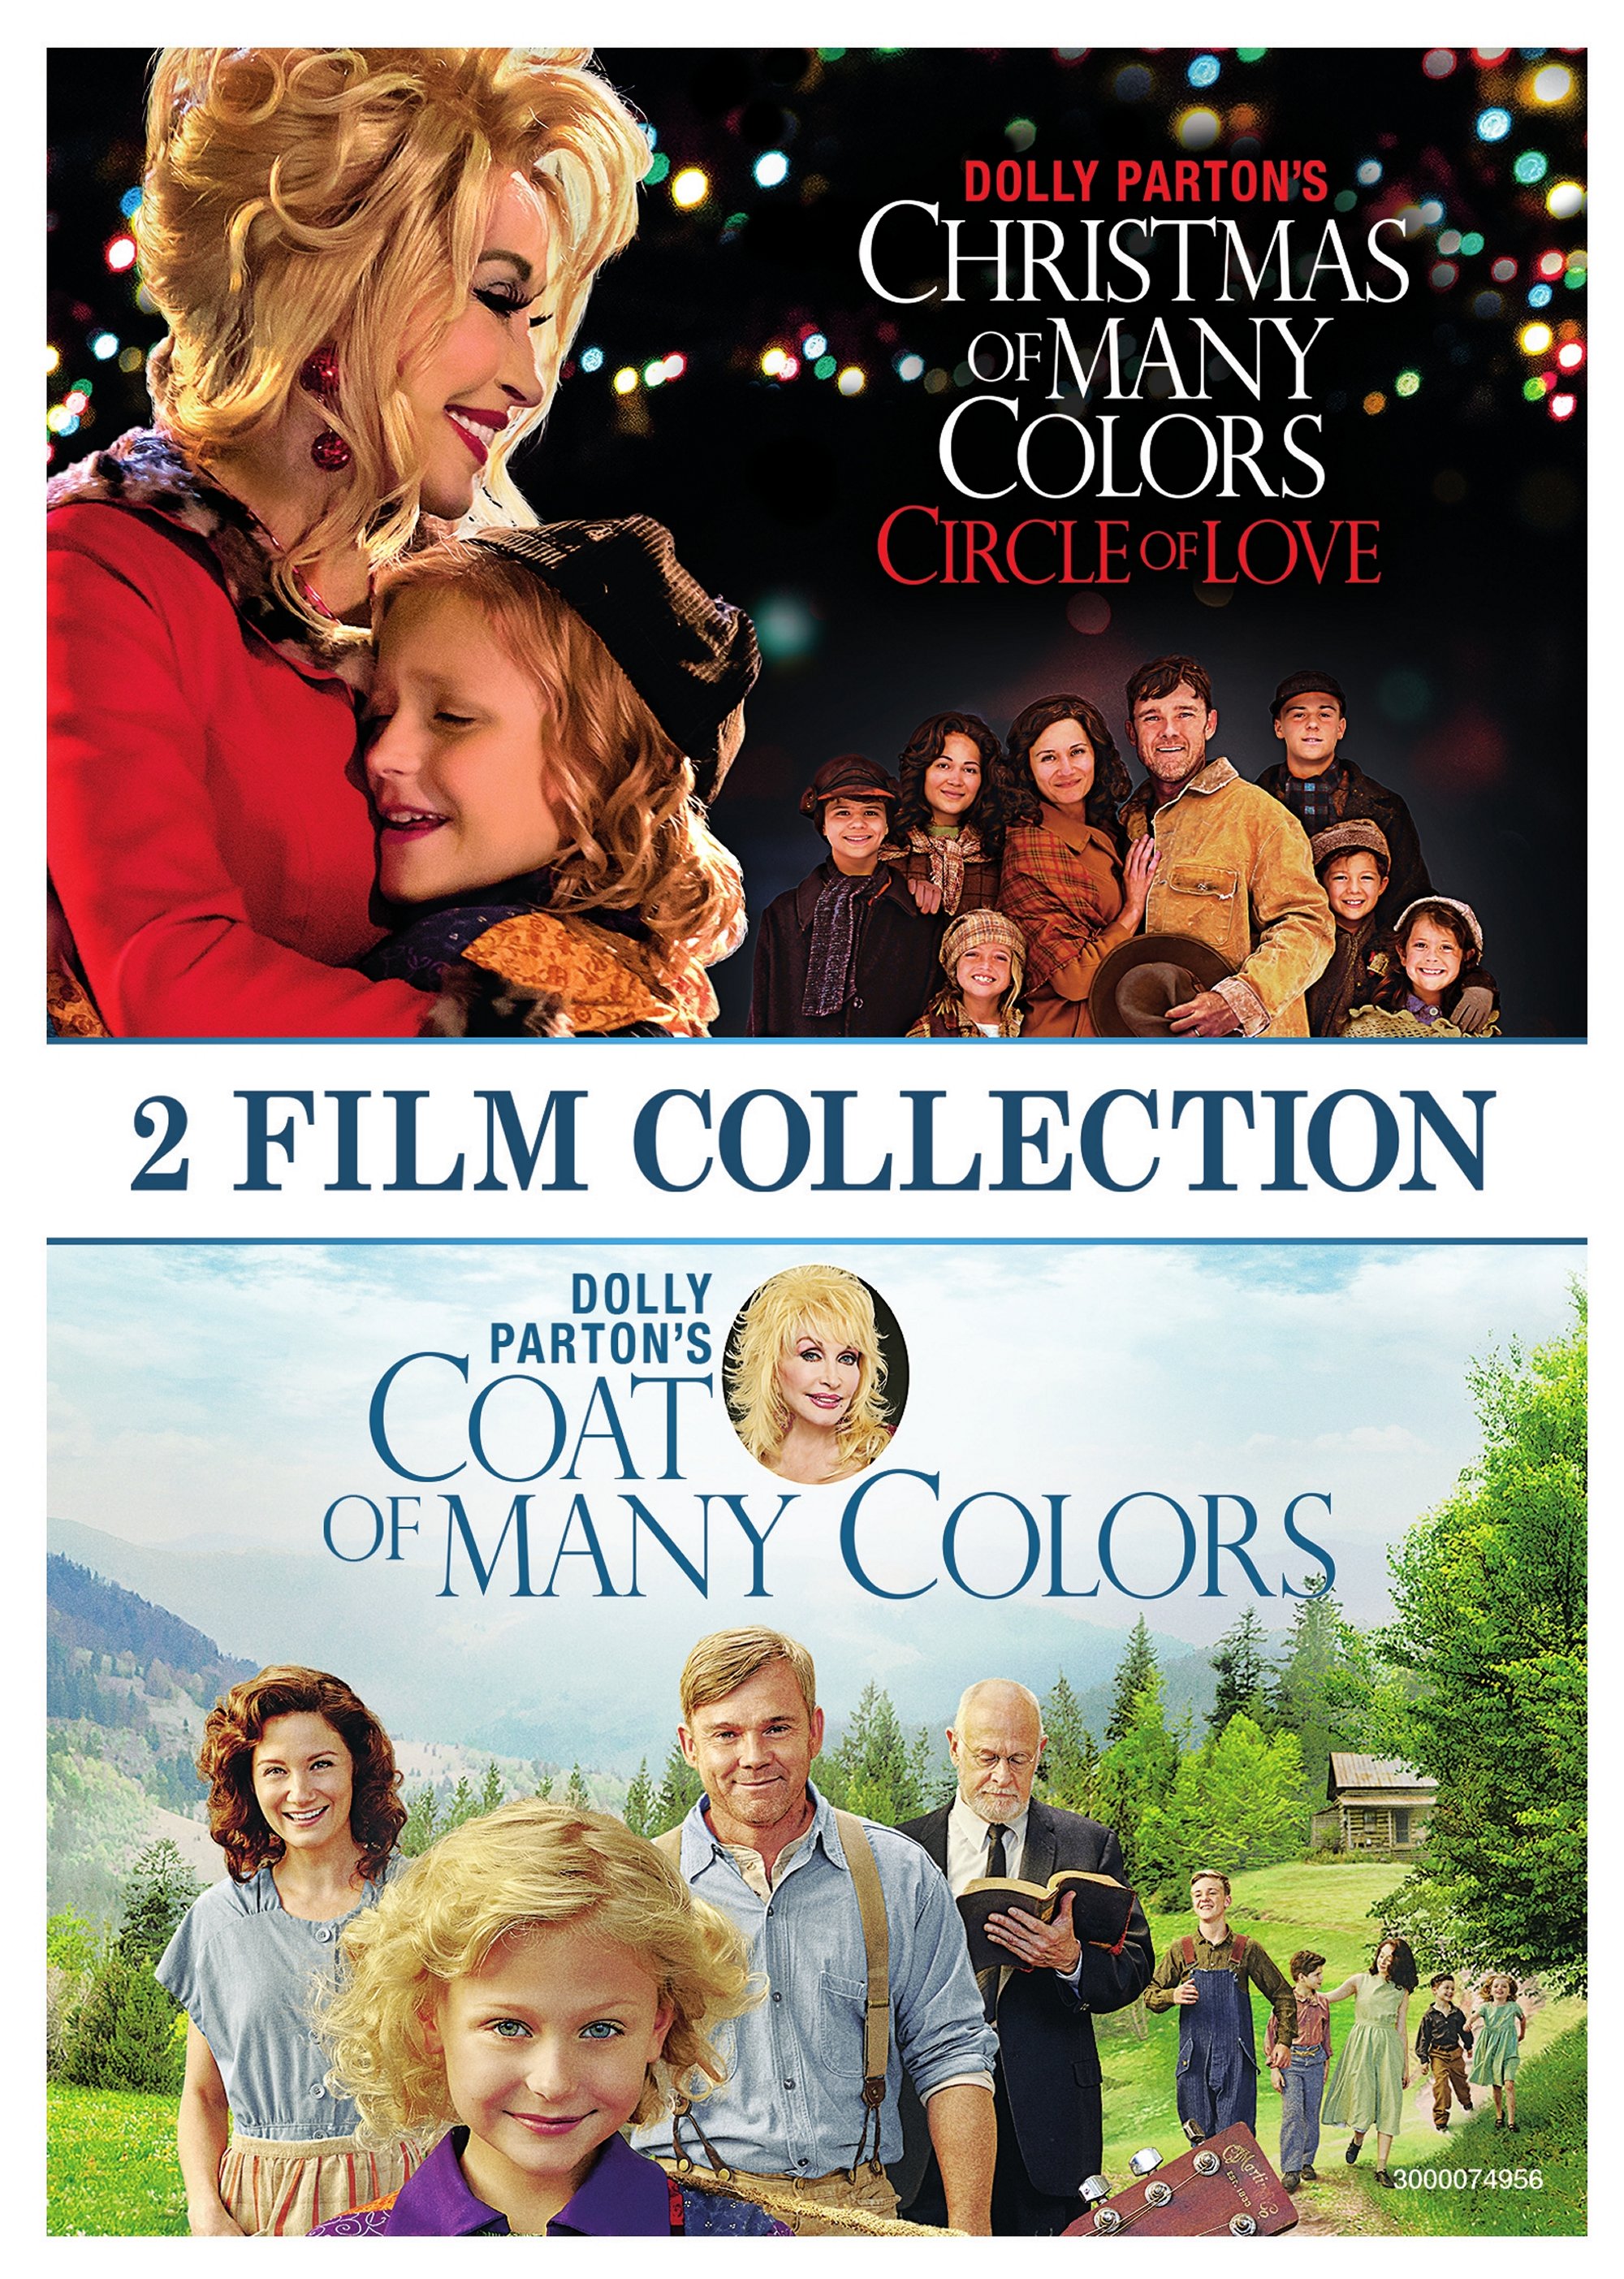 Dolly Parton S Coat Of Many Colors Dolly Parton S Christmas Of Many Colors Circle Of Love Dvd Best Buy